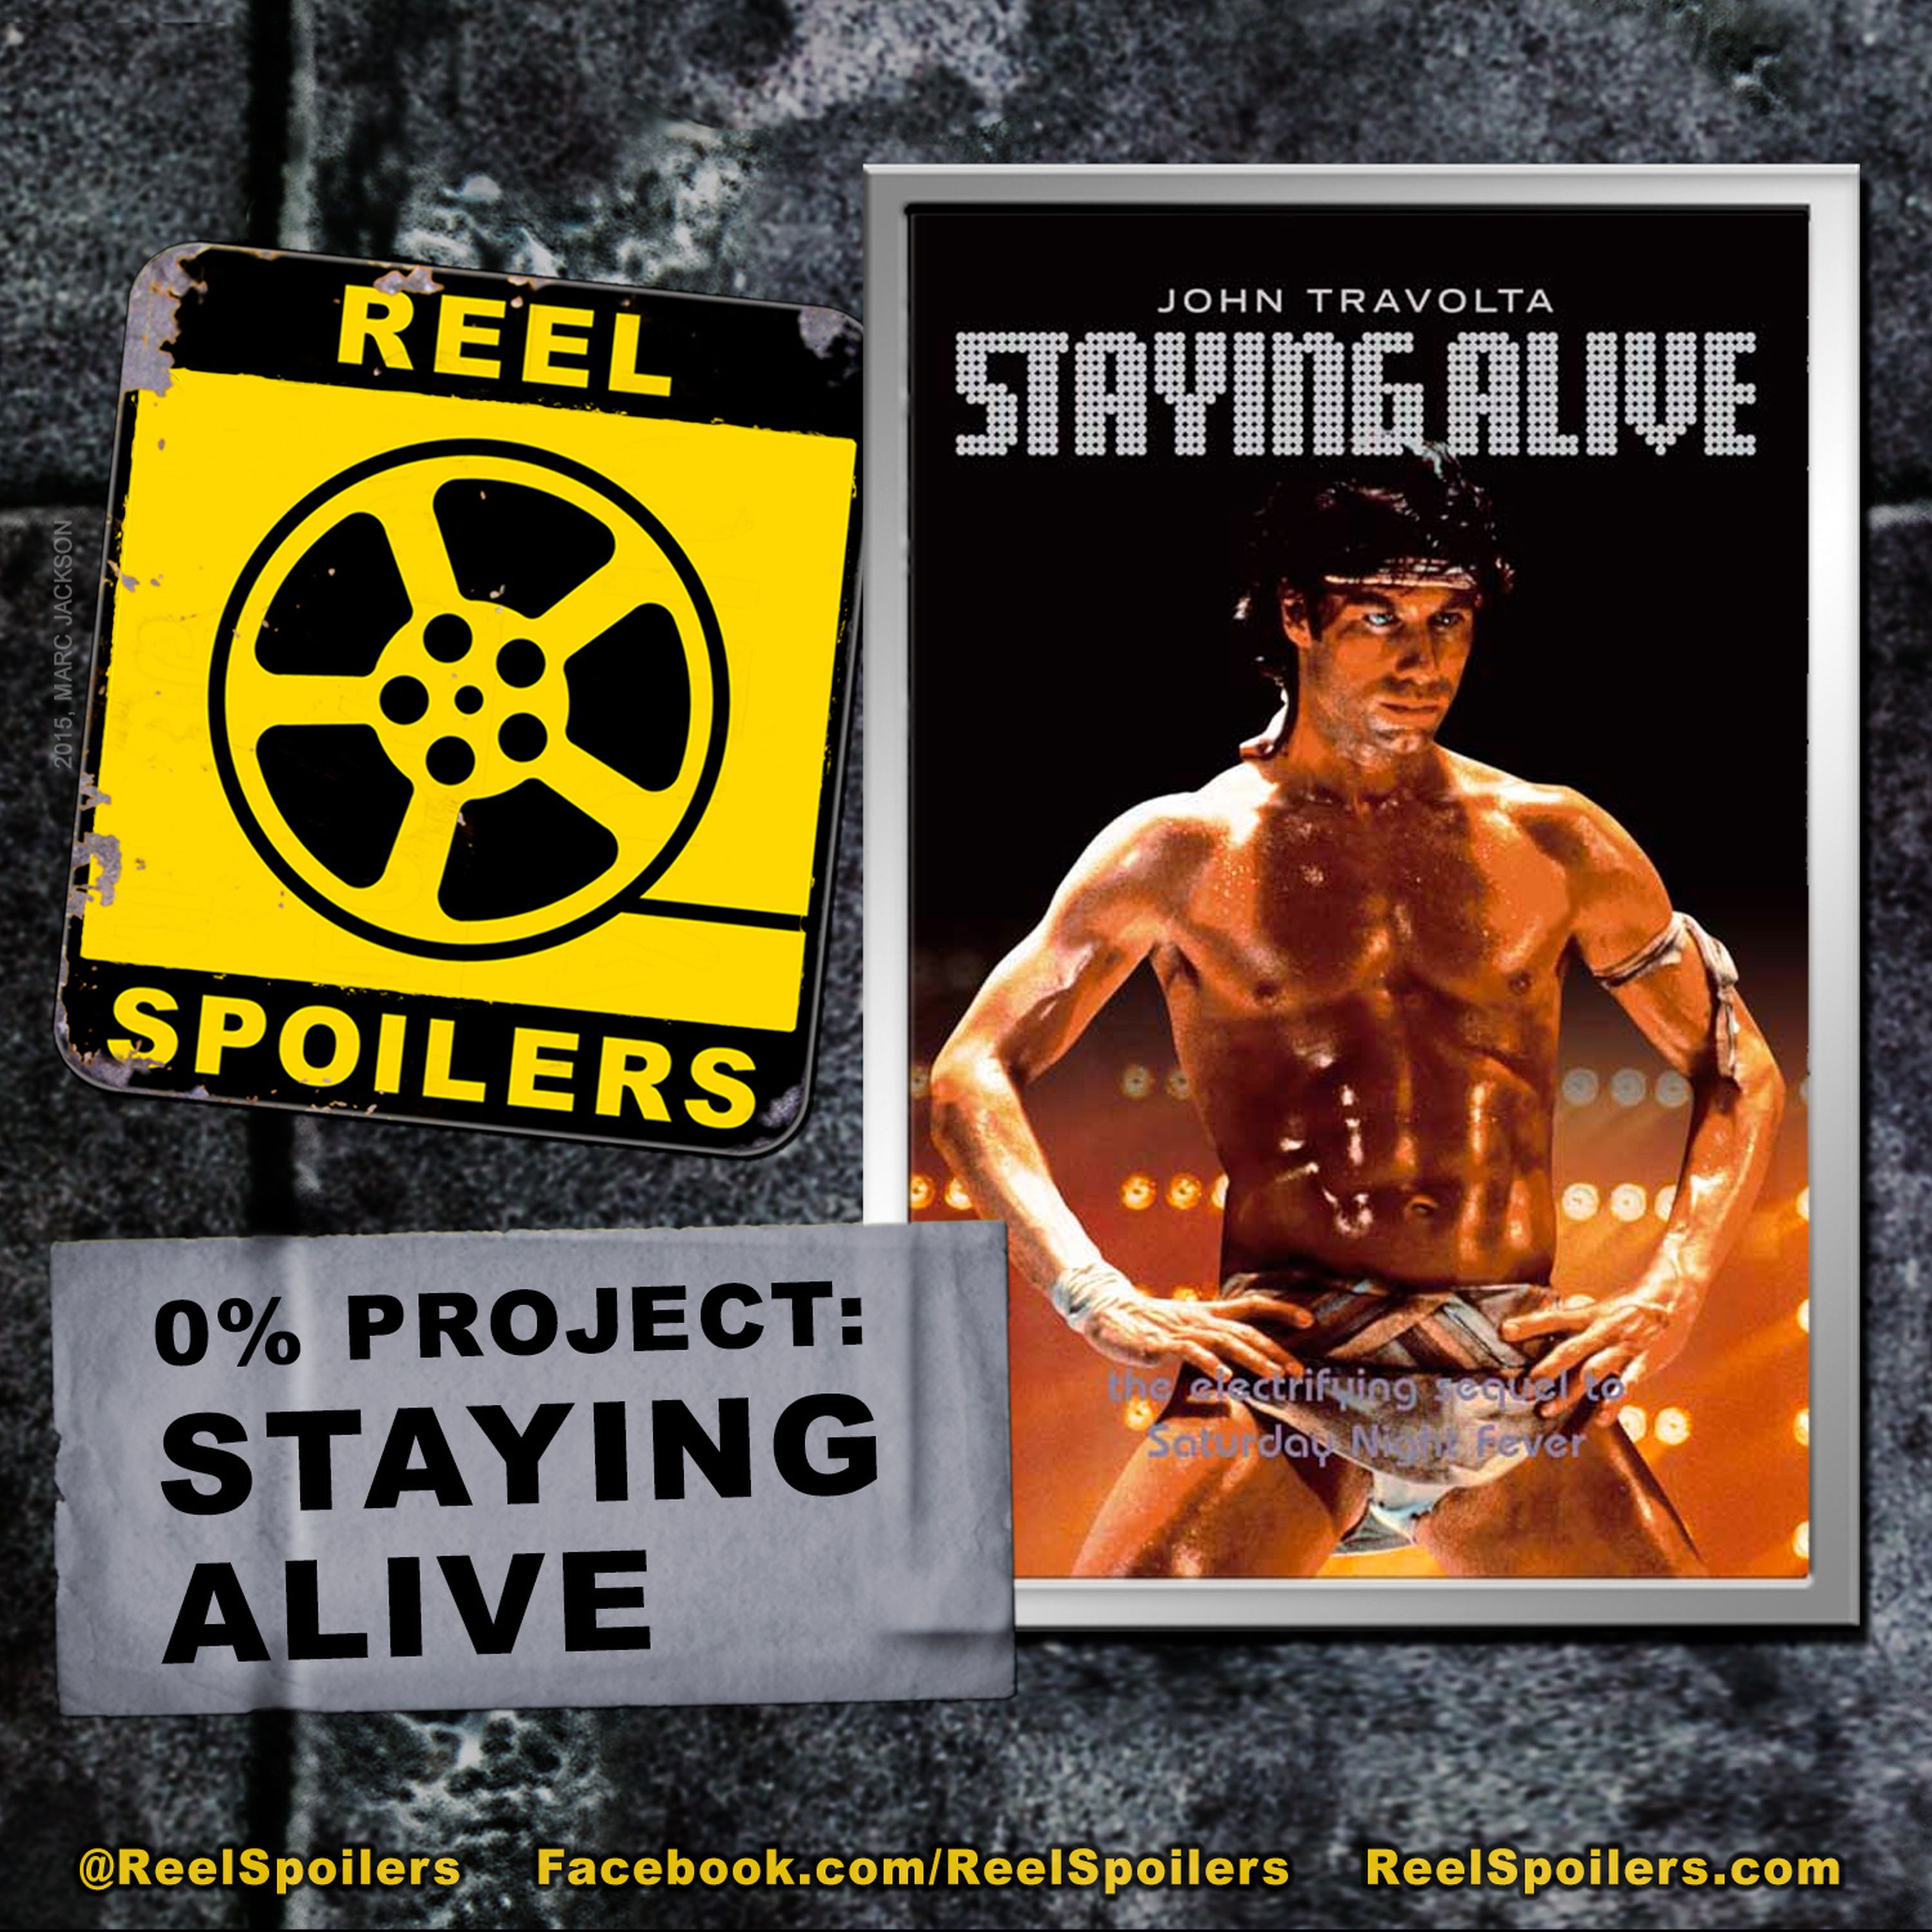 0% Project: STAYING ALIVE Starring John Travolta Image